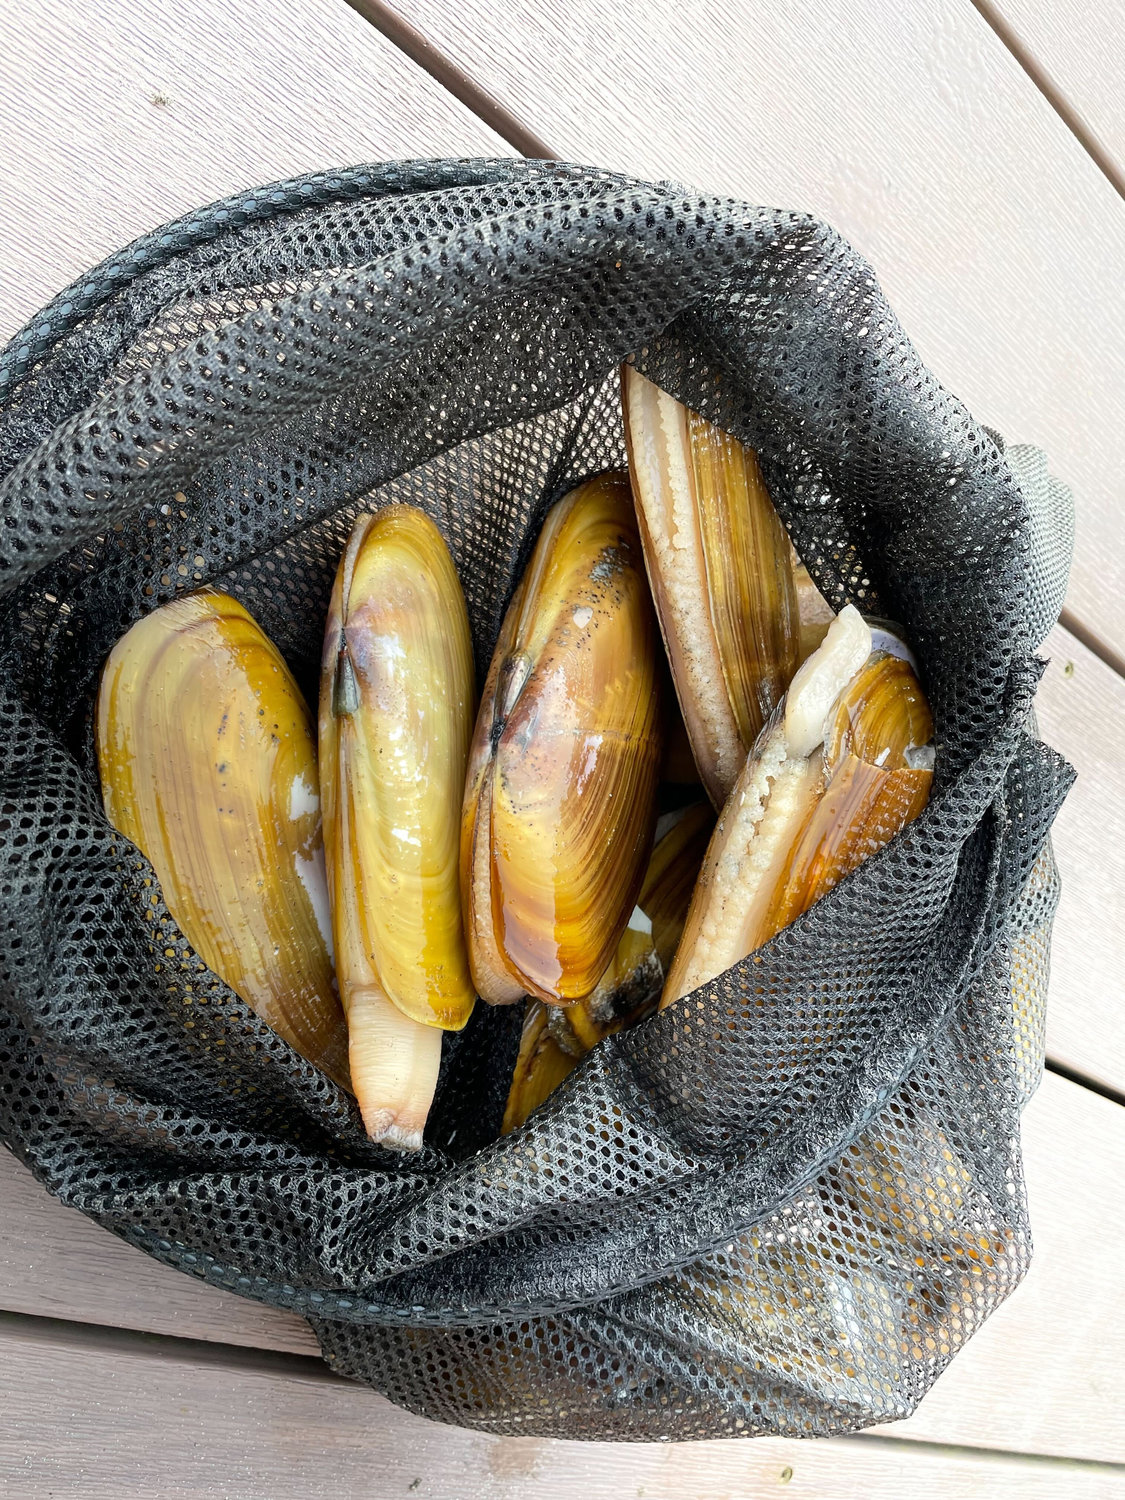 A bag with a limit of 15 razor clams dug at Mocrocks is pictured on March 18. The limit for digs scheduled from April 6 to April 20 has increased to 20 clams per person.